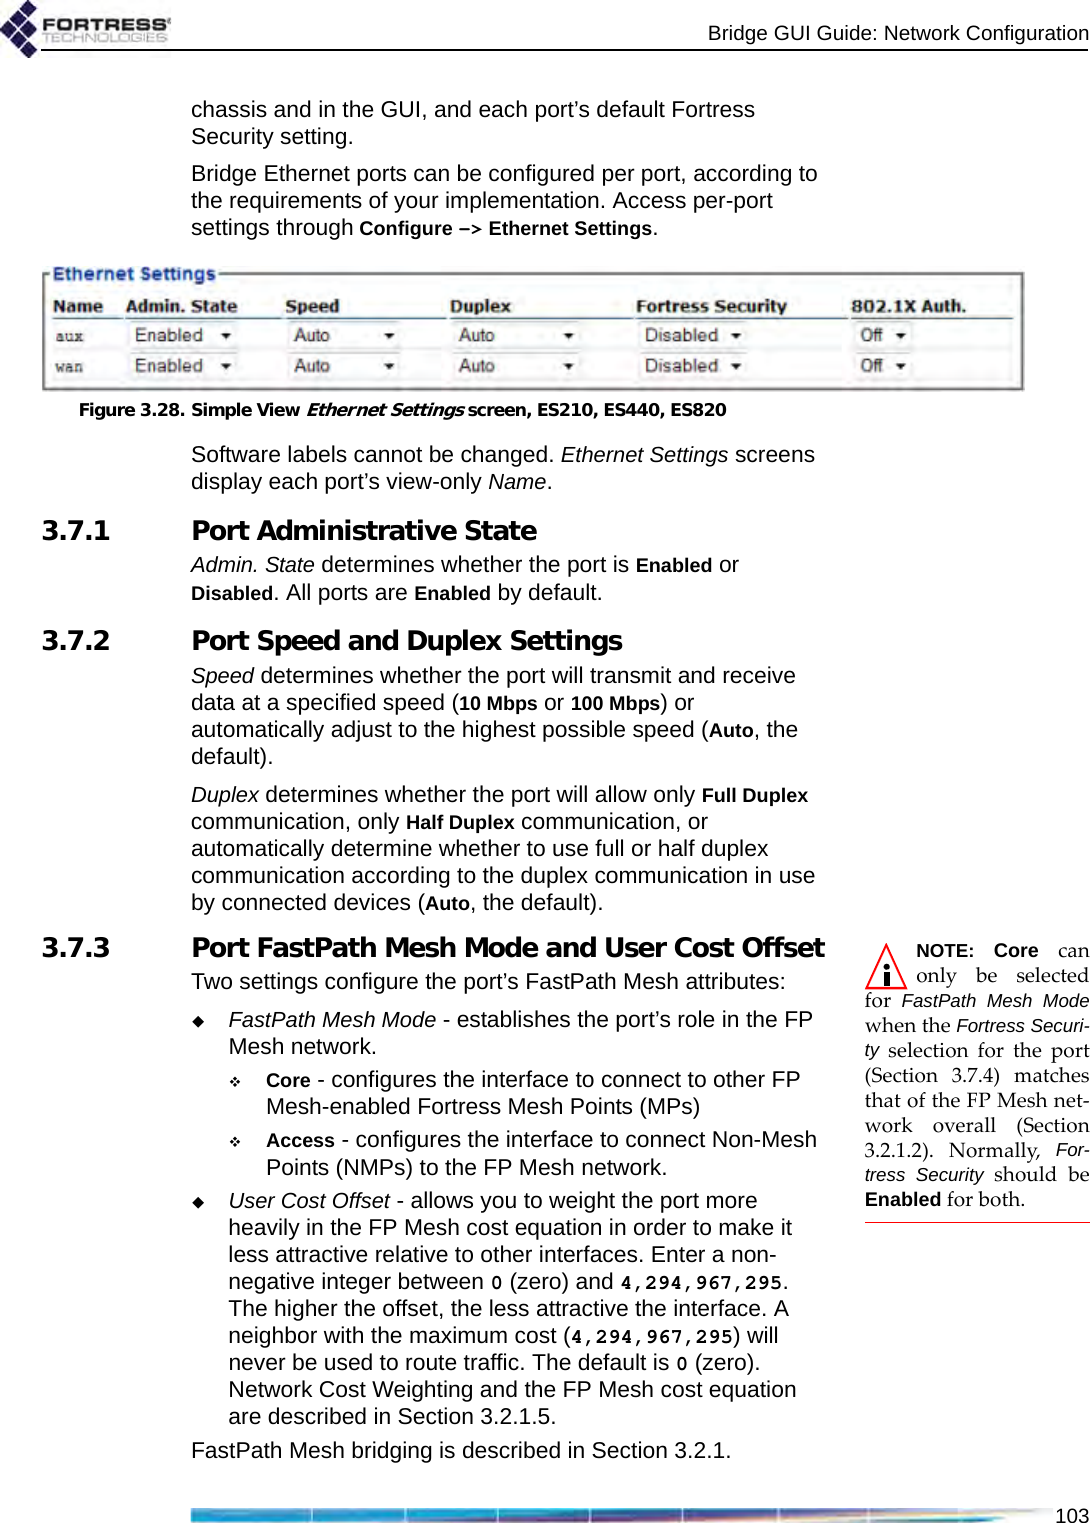 Bridge GUI Guide: Network Configuration103chassis and in the GUI, and each port’s default Fortress Security setting.Bridge Ethernet ports can be configured per port, according to the requirements of your implementation. Access per-port settings through Configure -&gt; Ethernet Settings.Figure 3.28. Simple View Ethernet Settings screen, ES210, ES440, ES820Software labels cannot be changed. Ethernet Settings screens display each port’s view-only Name. 3.7.1 Port Administrative StateAdmin. State determines whether the port is Enabled or Disabled. All ports are Enabled by default.3.7.2 Port Speed and Duplex SettingsSpeed determines whether the port will transmit and receive data at a specified speed (10 Mbps or 100 Mbps) or automatically adjust to the highest possible speed (Auto, the default).Duplex determines whether the port will allow only Full Duplex communication, only Half Duplex communication, or automatically determine whether to use full or half duplex communication according to the duplex communication in use by connected devices (Auto, the default).NOTE: Core canonly be selectedfor  FastPath Mesh Modewhen the Fortress Securi-ty selection for the port(Section 3.7.4) matchesthat of the FP Mesh net-work overall (Section3.2.1.2). Normally, For-tress Security should beEnabled for both.3.7.3 Port FastPath Mesh Mode and User Cost OffsetTwo settings configure the port’s FastPath Mesh attributes:FastPath Mesh Mode - establishes the port’s role in the FP Mesh network.Core - configures the interface to connect to other FP Mesh-enabled Fortress Mesh Points (MPs)Access - configures the interface to connect Non-Mesh Points (NMPs) to the FP Mesh network.User Cost Offset - allows you to weight the port more heavily in the FP Mesh cost equation in order to make it less attractive relative to other interfaces. Enter a non-negative integer between 0 (zero) and 4,294,967,295. The higher the offset, the less attractive the interface. A neighbor with the maximum cost (4,294,967,295) will never be used to route traffic. The default is 0 (zero). Network Cost Weighting and the FP Mesh cost equation are described in Section 3.2.1.5.FastPath Mesh bridging is described in Section 3.2.1.